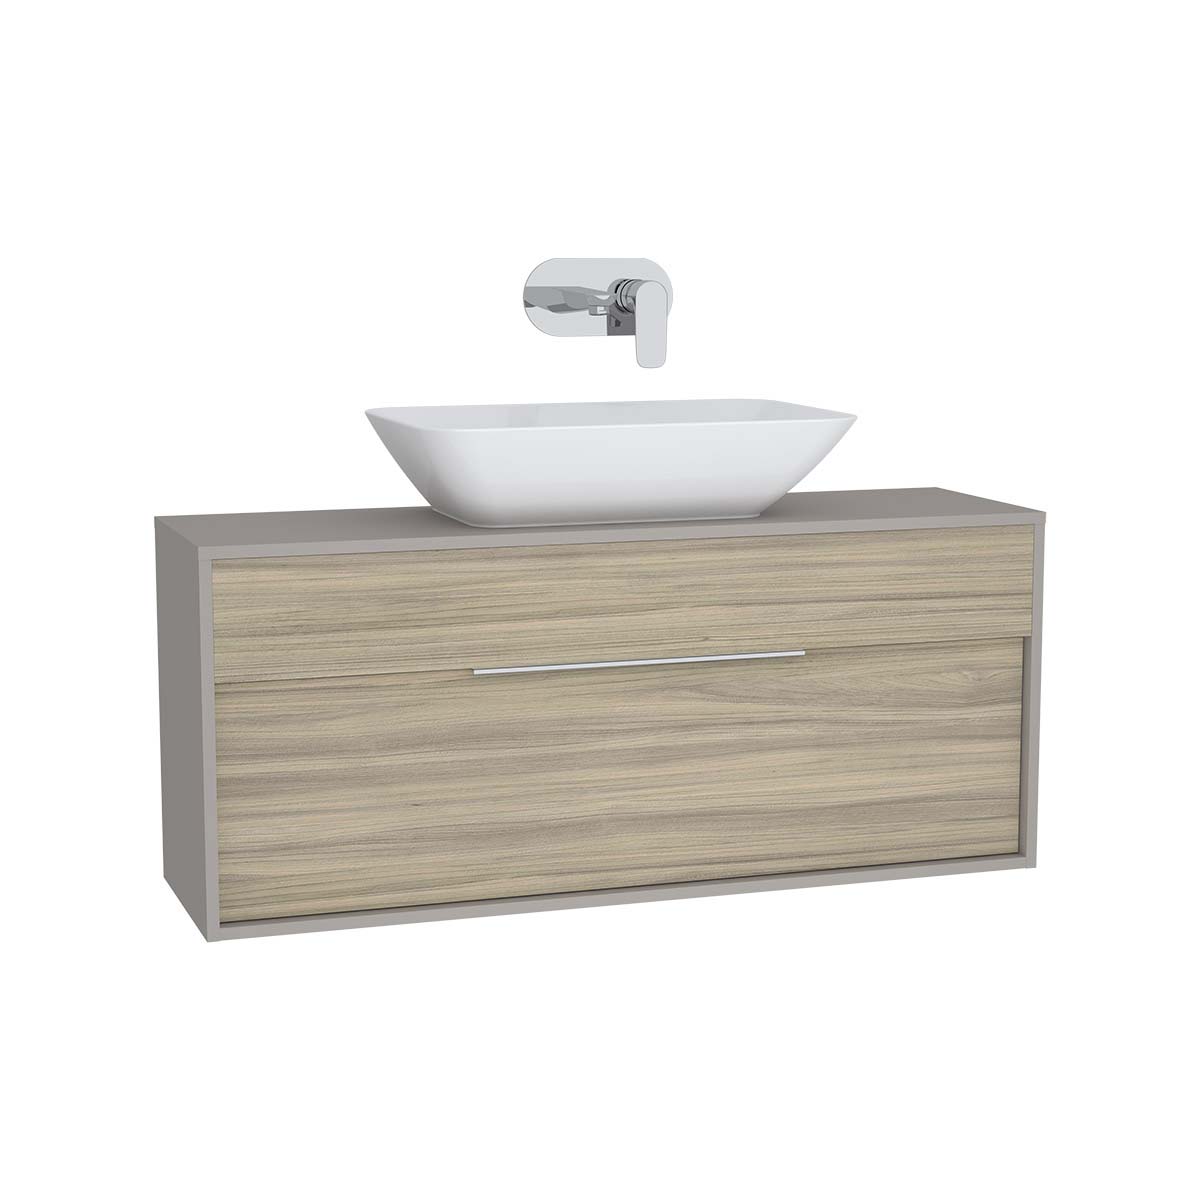 Integra Washbasin Unit, 120 cm, with 1 drawer, for countertop basins, with 34 cm depth, Grey Elm & Gritstone